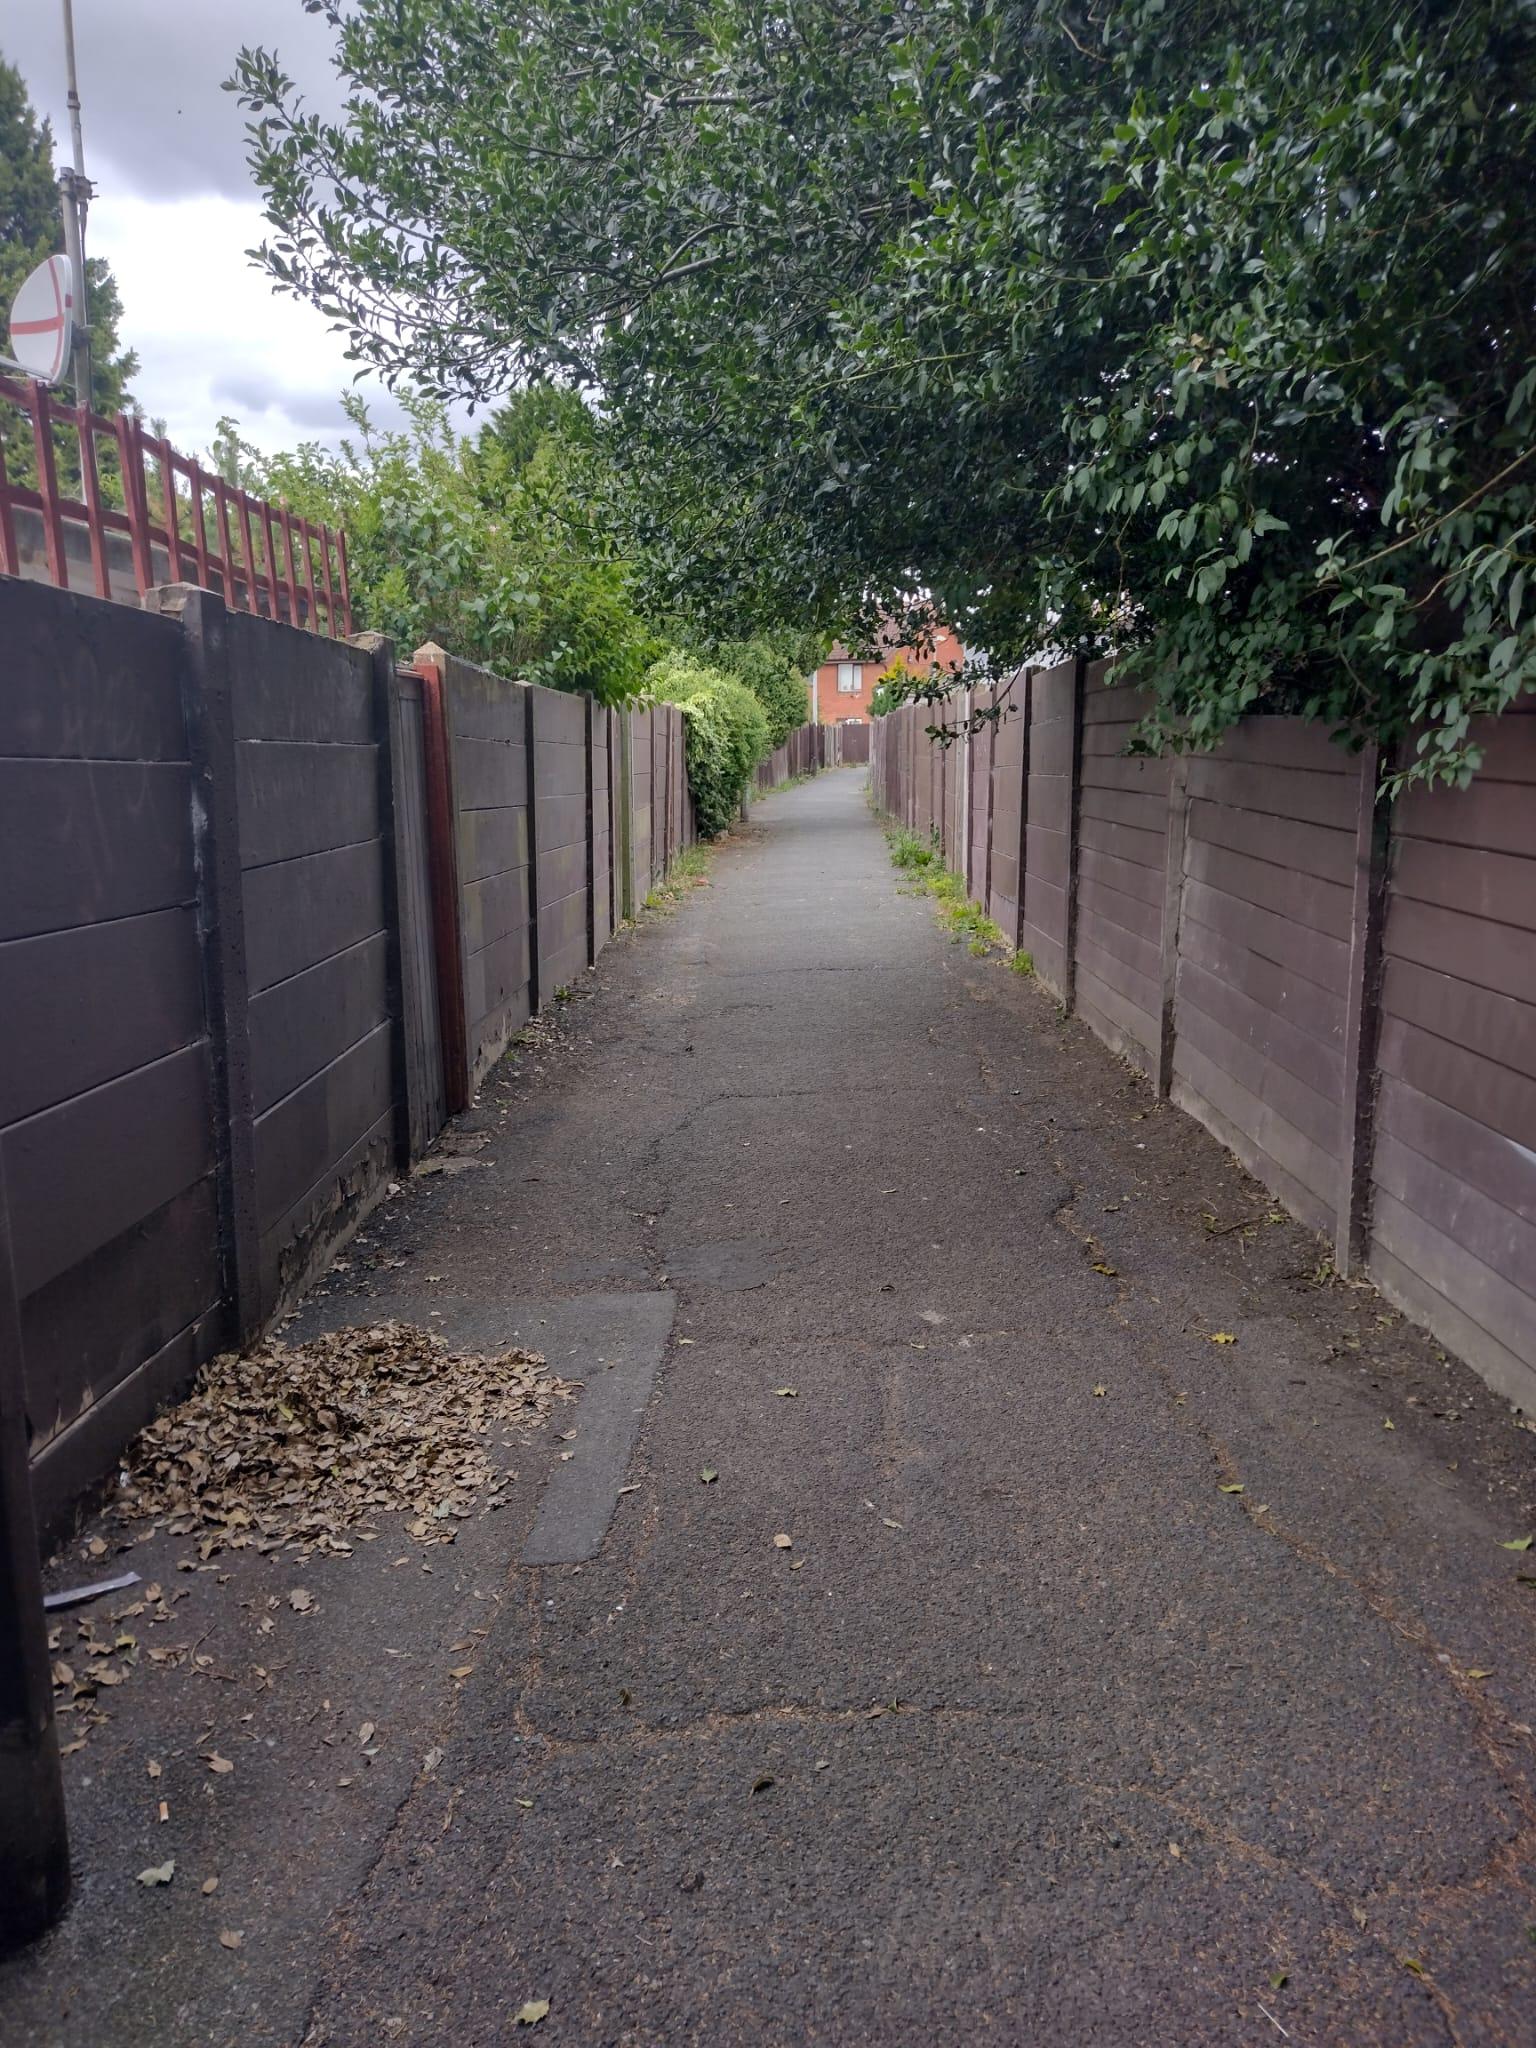 Donkey Alley in Norbiton after its clean-up